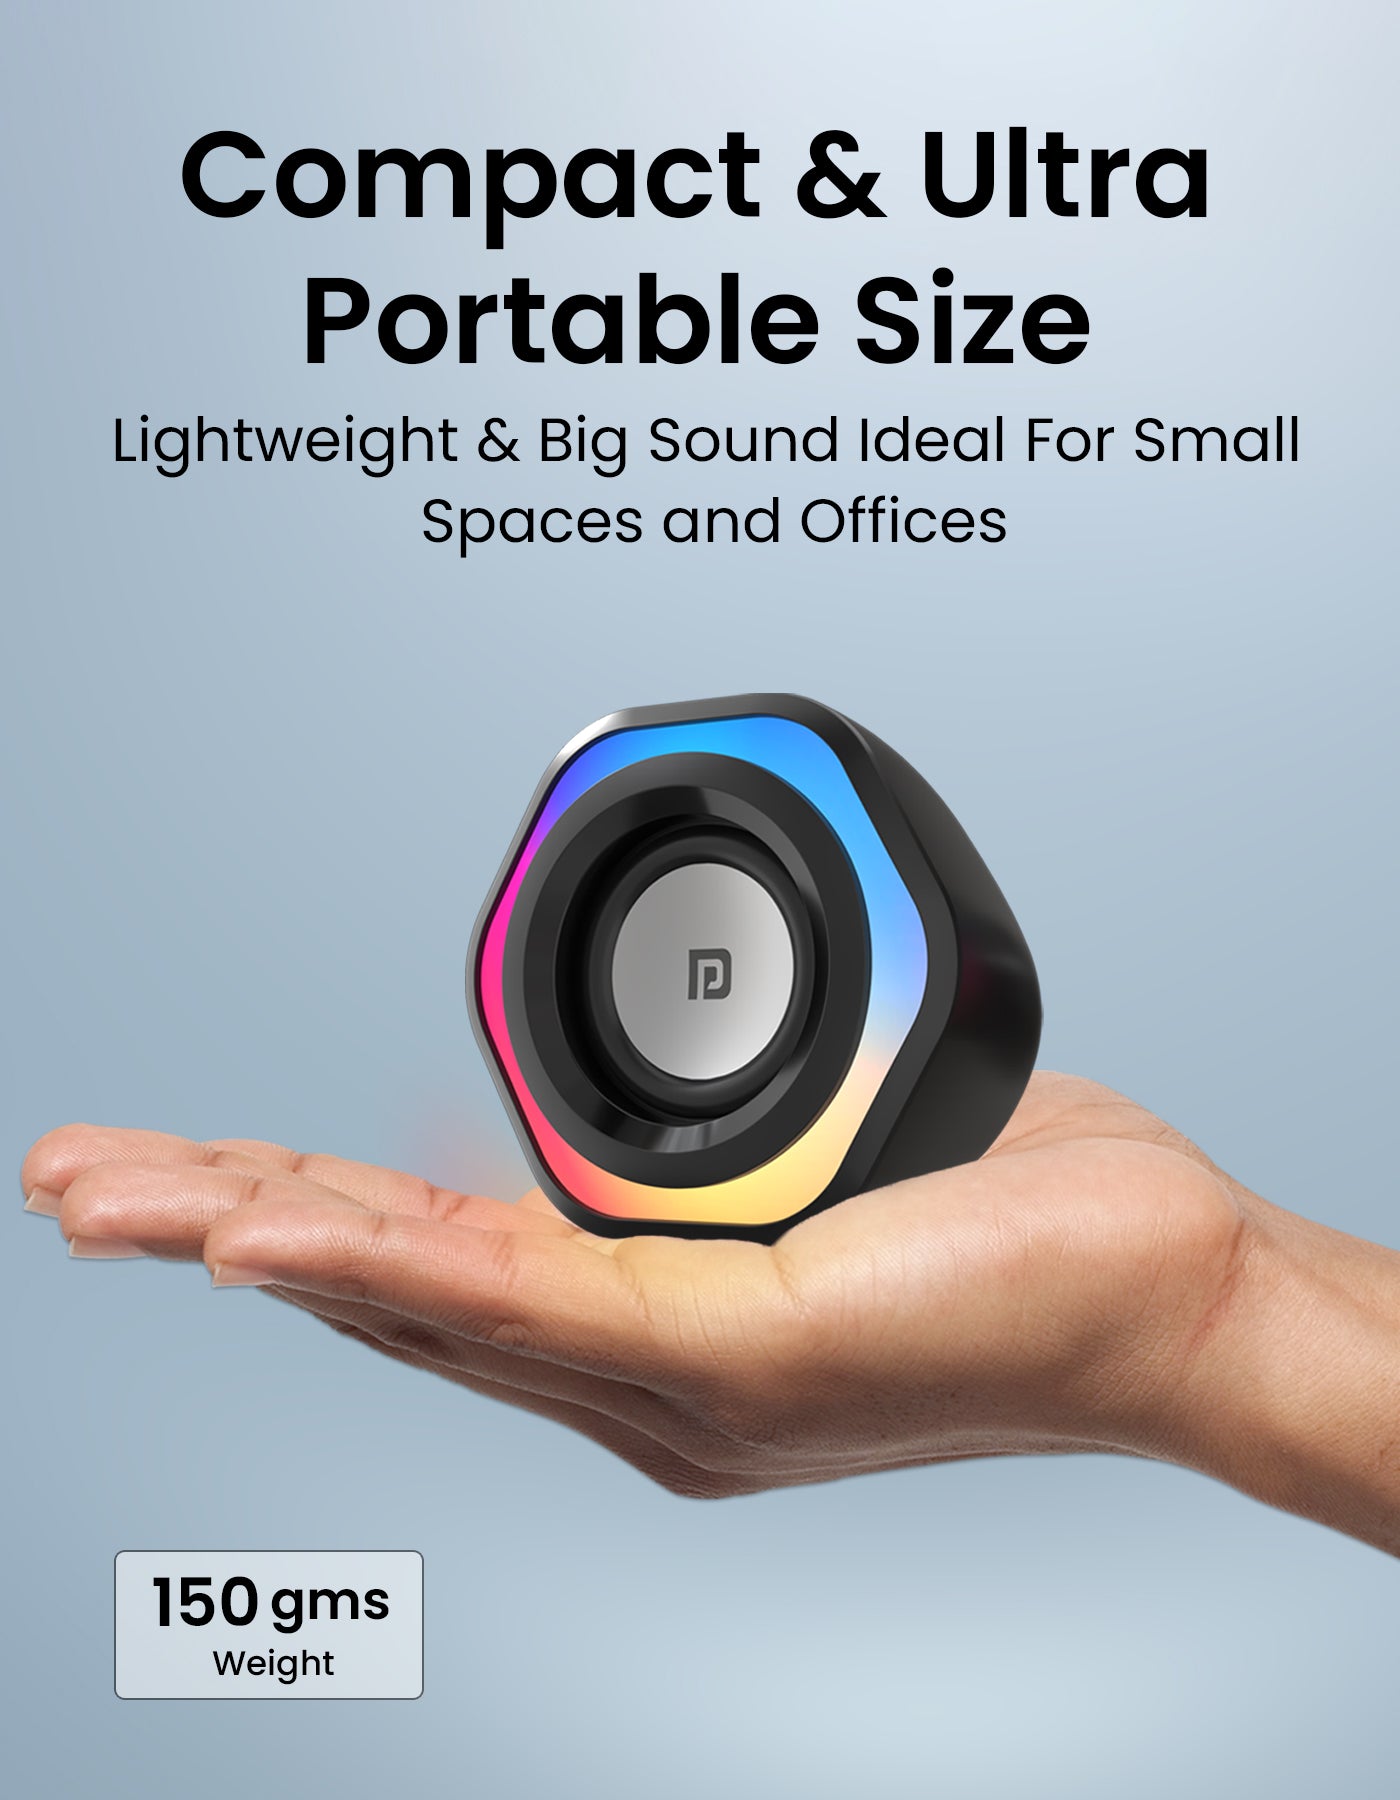 Portronics In Tune 4 6 watts usb speaker is compact and portable sizes